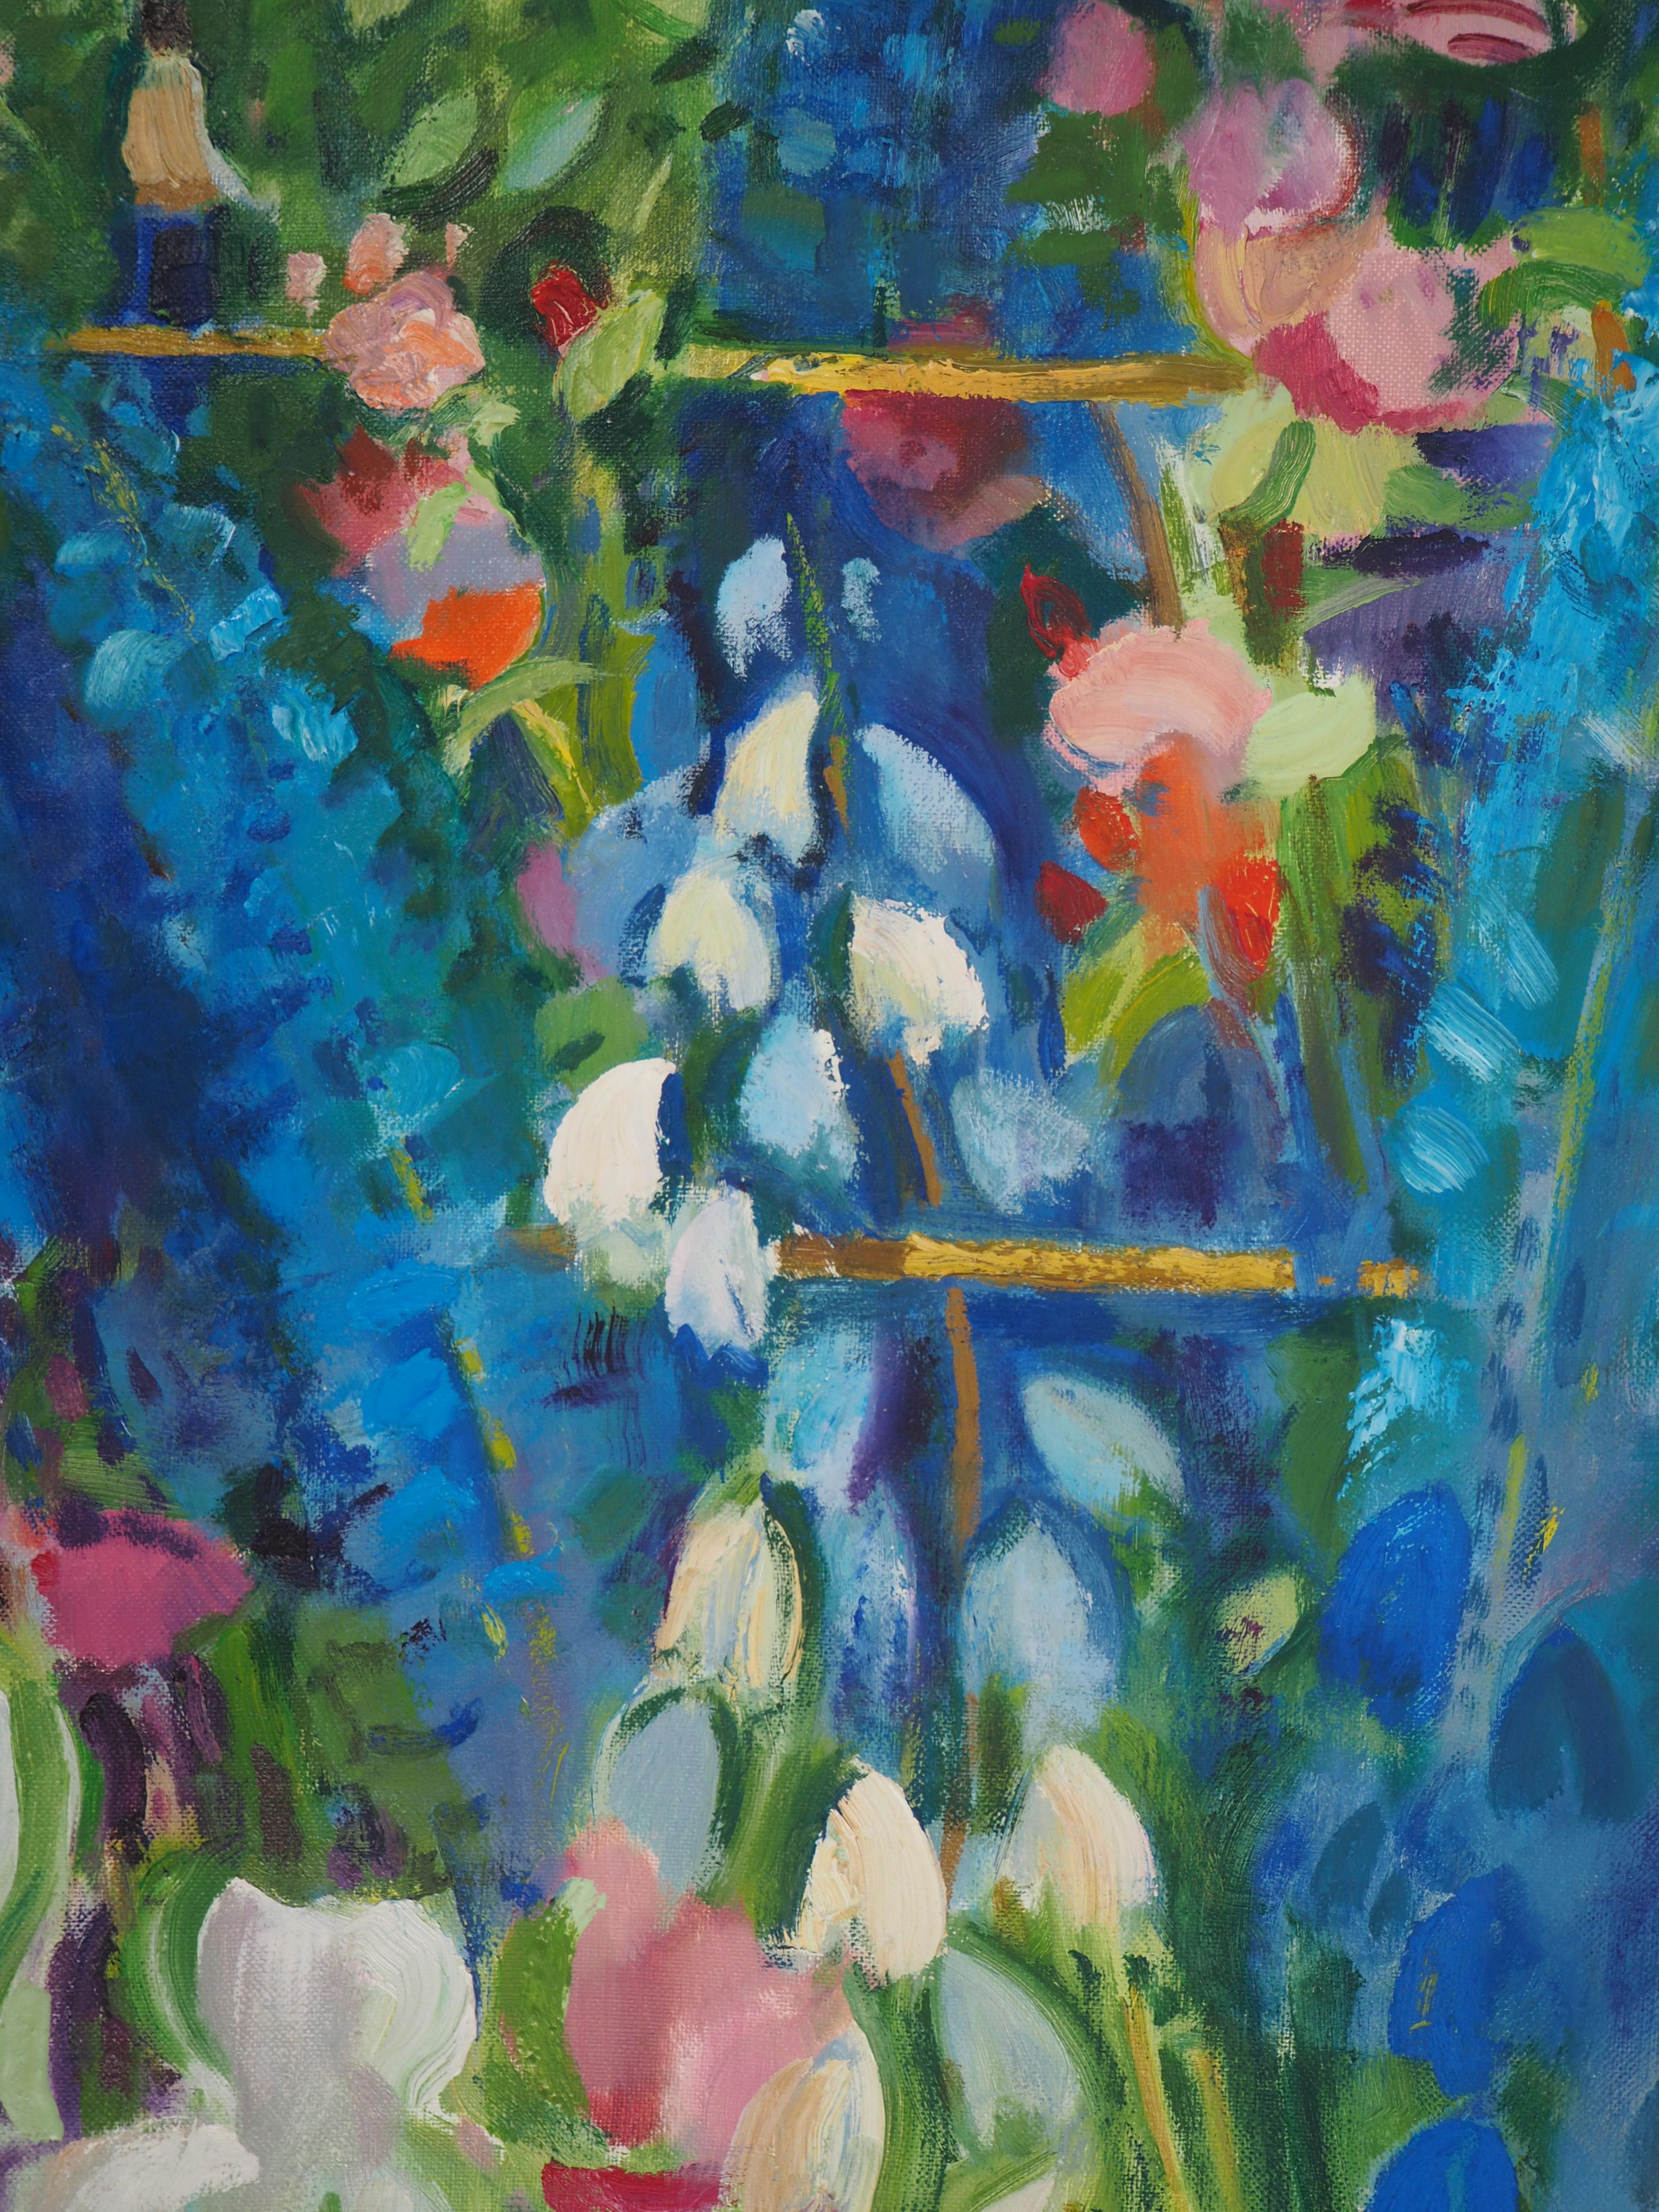 Paul Collomb
Garden : White Irises and Delphiniums 

Original Oil painting on canvas
Handsigned bottom left
Titled on the back
On Canvas 61 x 50 cm (c. 24 x 20 in)

Excellent condition